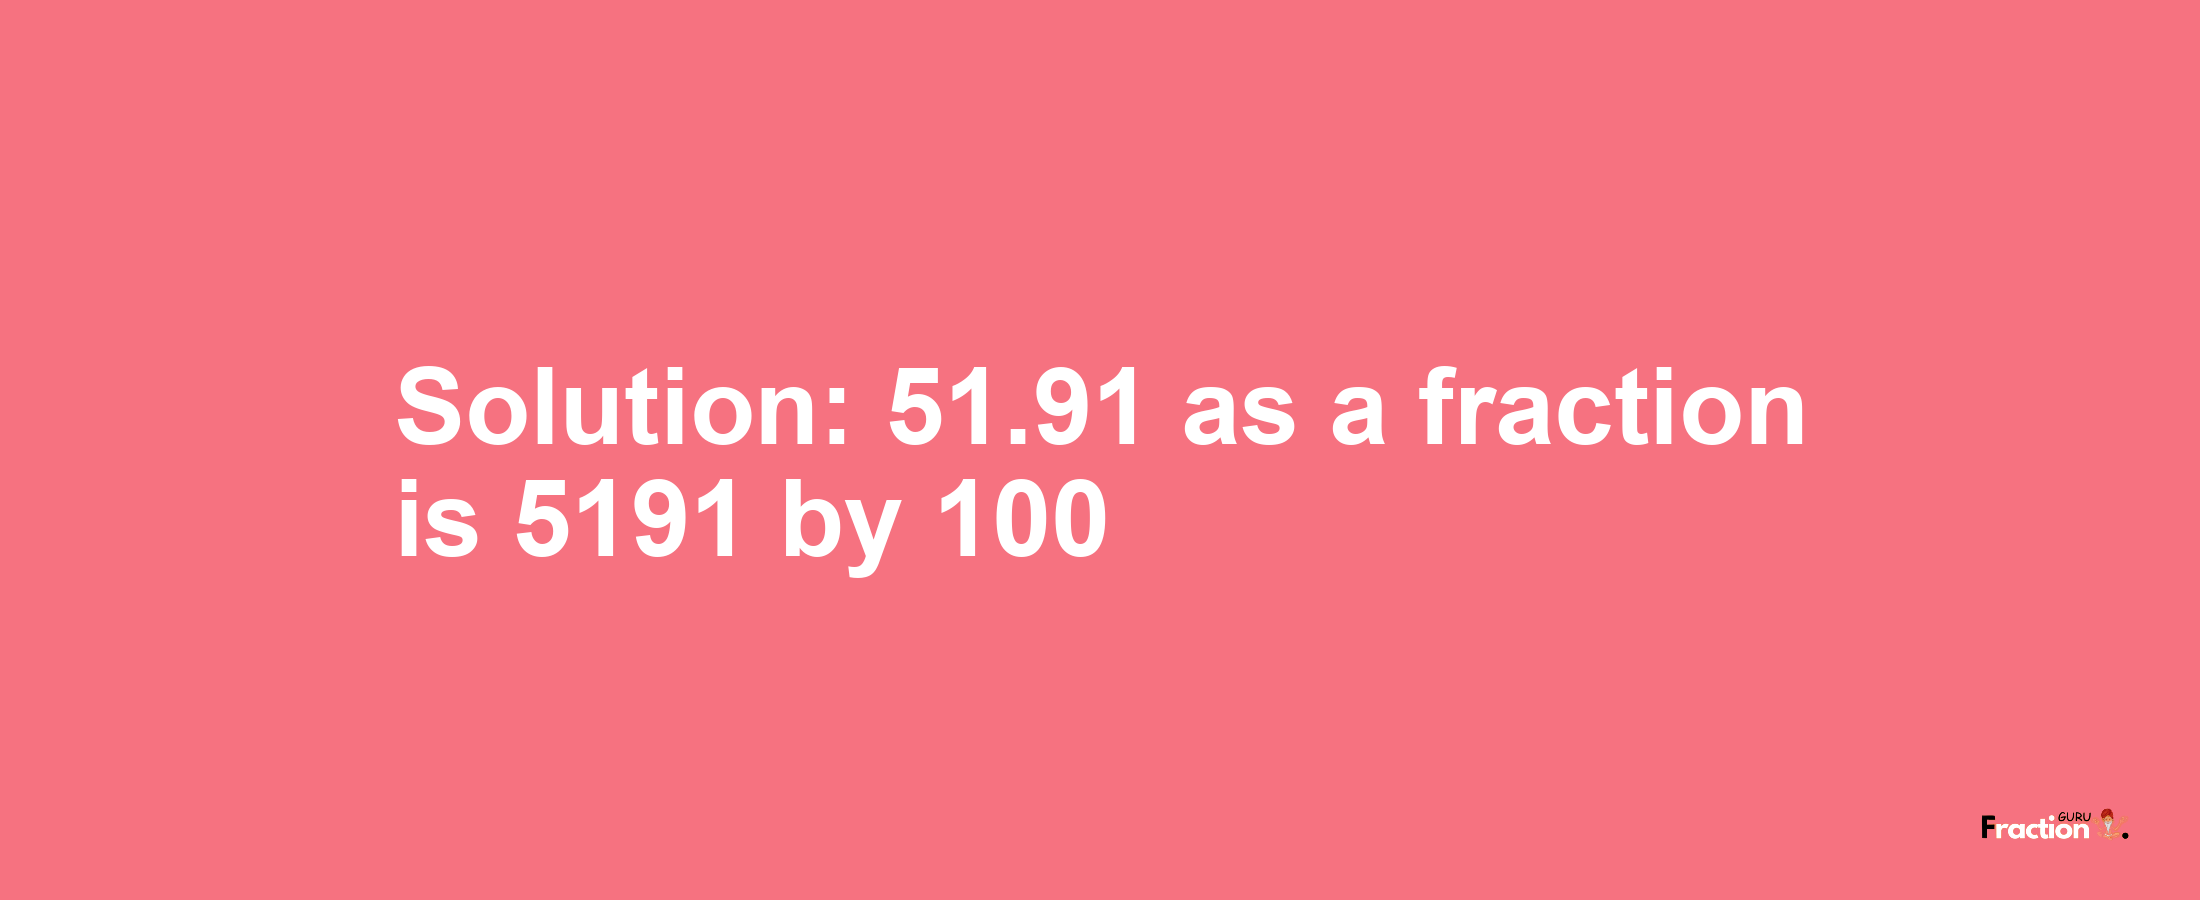 Solution:51.91 as a fraction is 5191/100